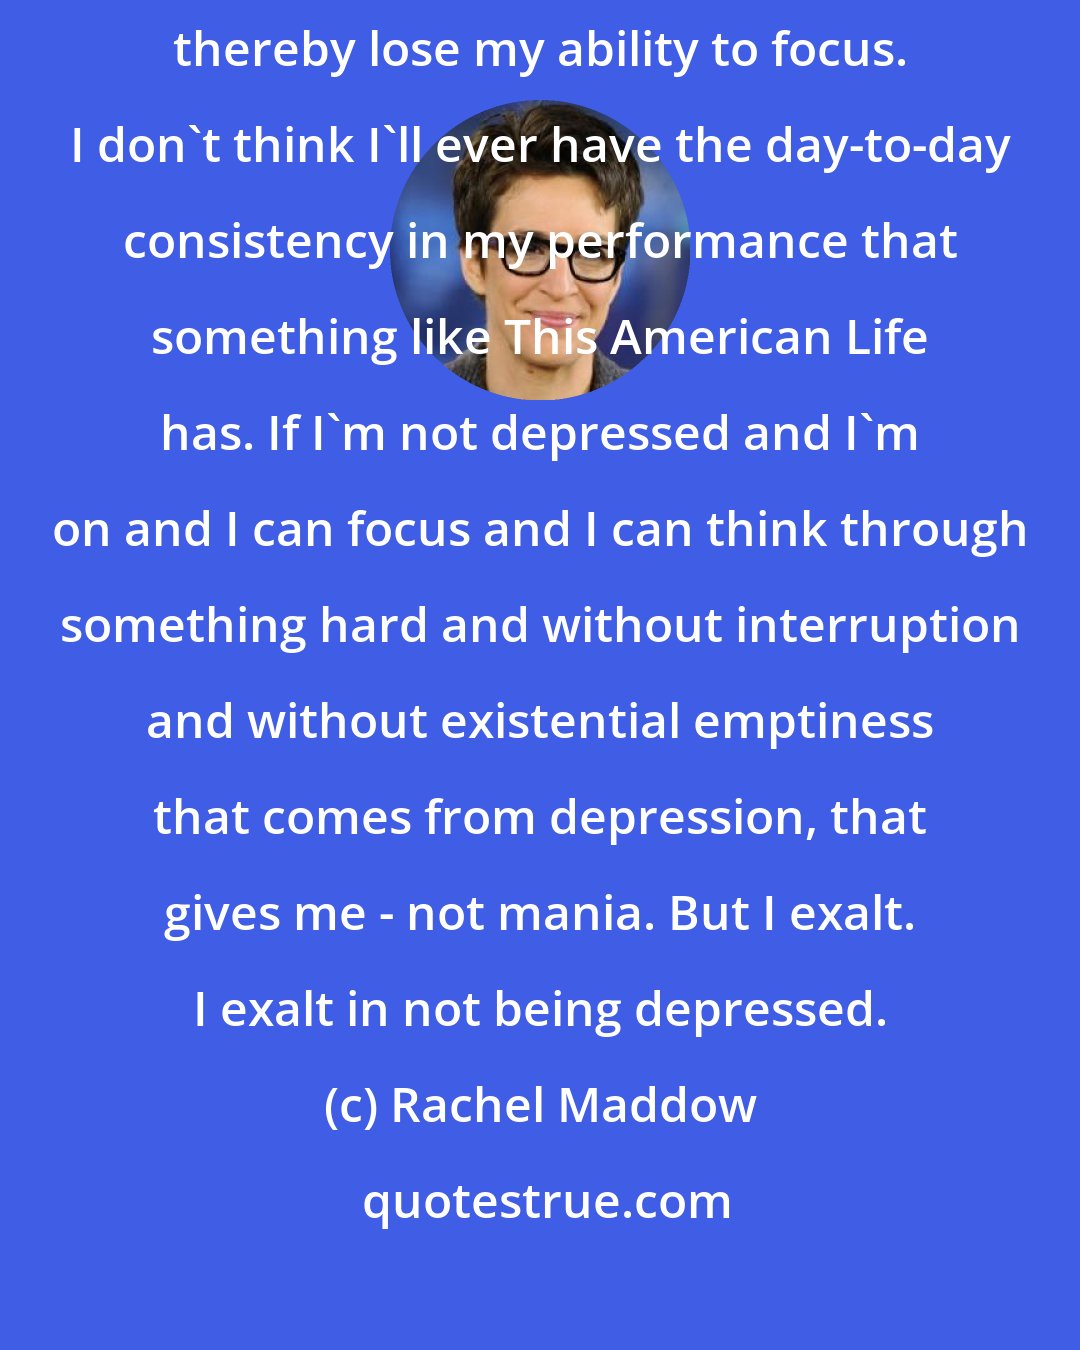 Rachel Maddow: One of the manifestations of depression for me is that I lose my will. And I thereby lose my ability to focus. I don't think I'll ever have the day-to-day consistency in my performance that something like This American Life has. If I'm not depressed and I'm on and I can focus and I can think through something hard and without interruption and without existential emptiness that comes from depression, that gives me - not mania. But I exalt. I exalt in not being depressed.